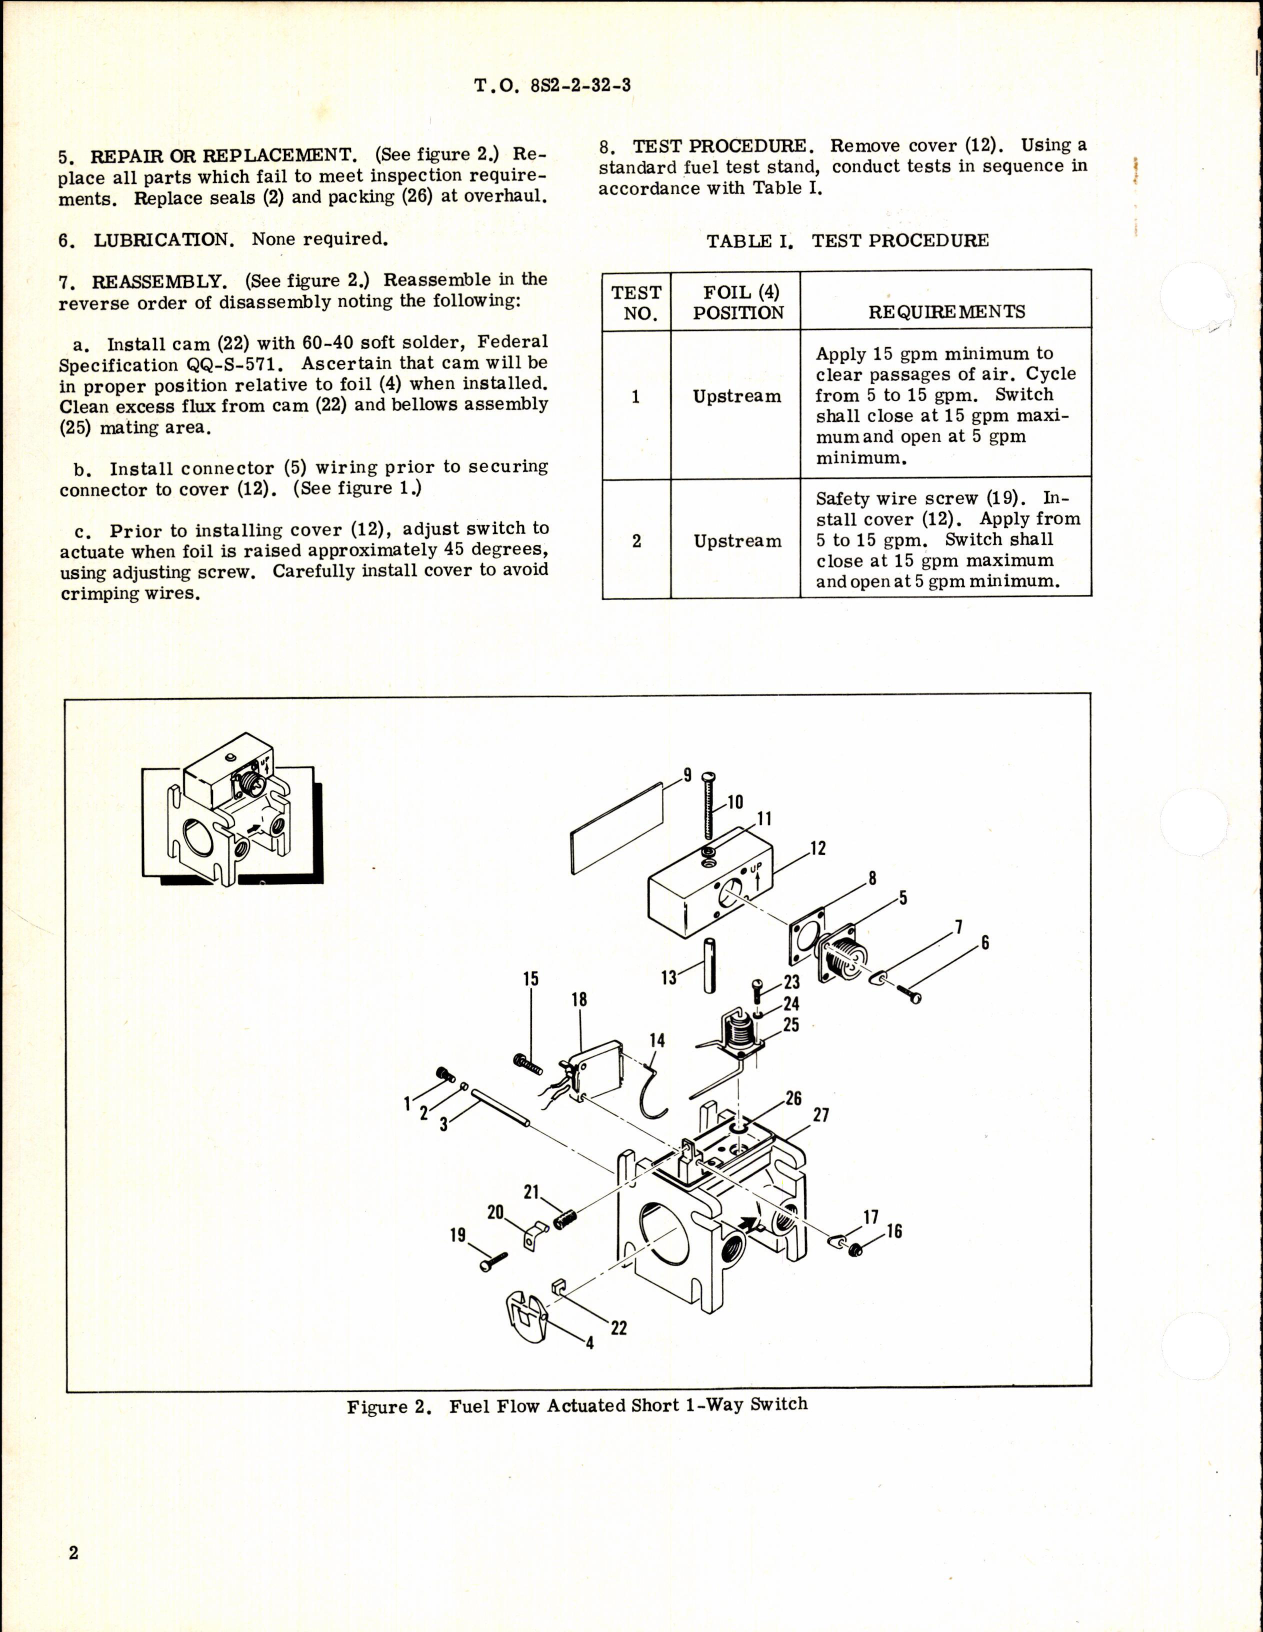 Sample page 2 from AirCorps Library document: Fuel Flow Actuated Short 1-Way Switch Part No 950